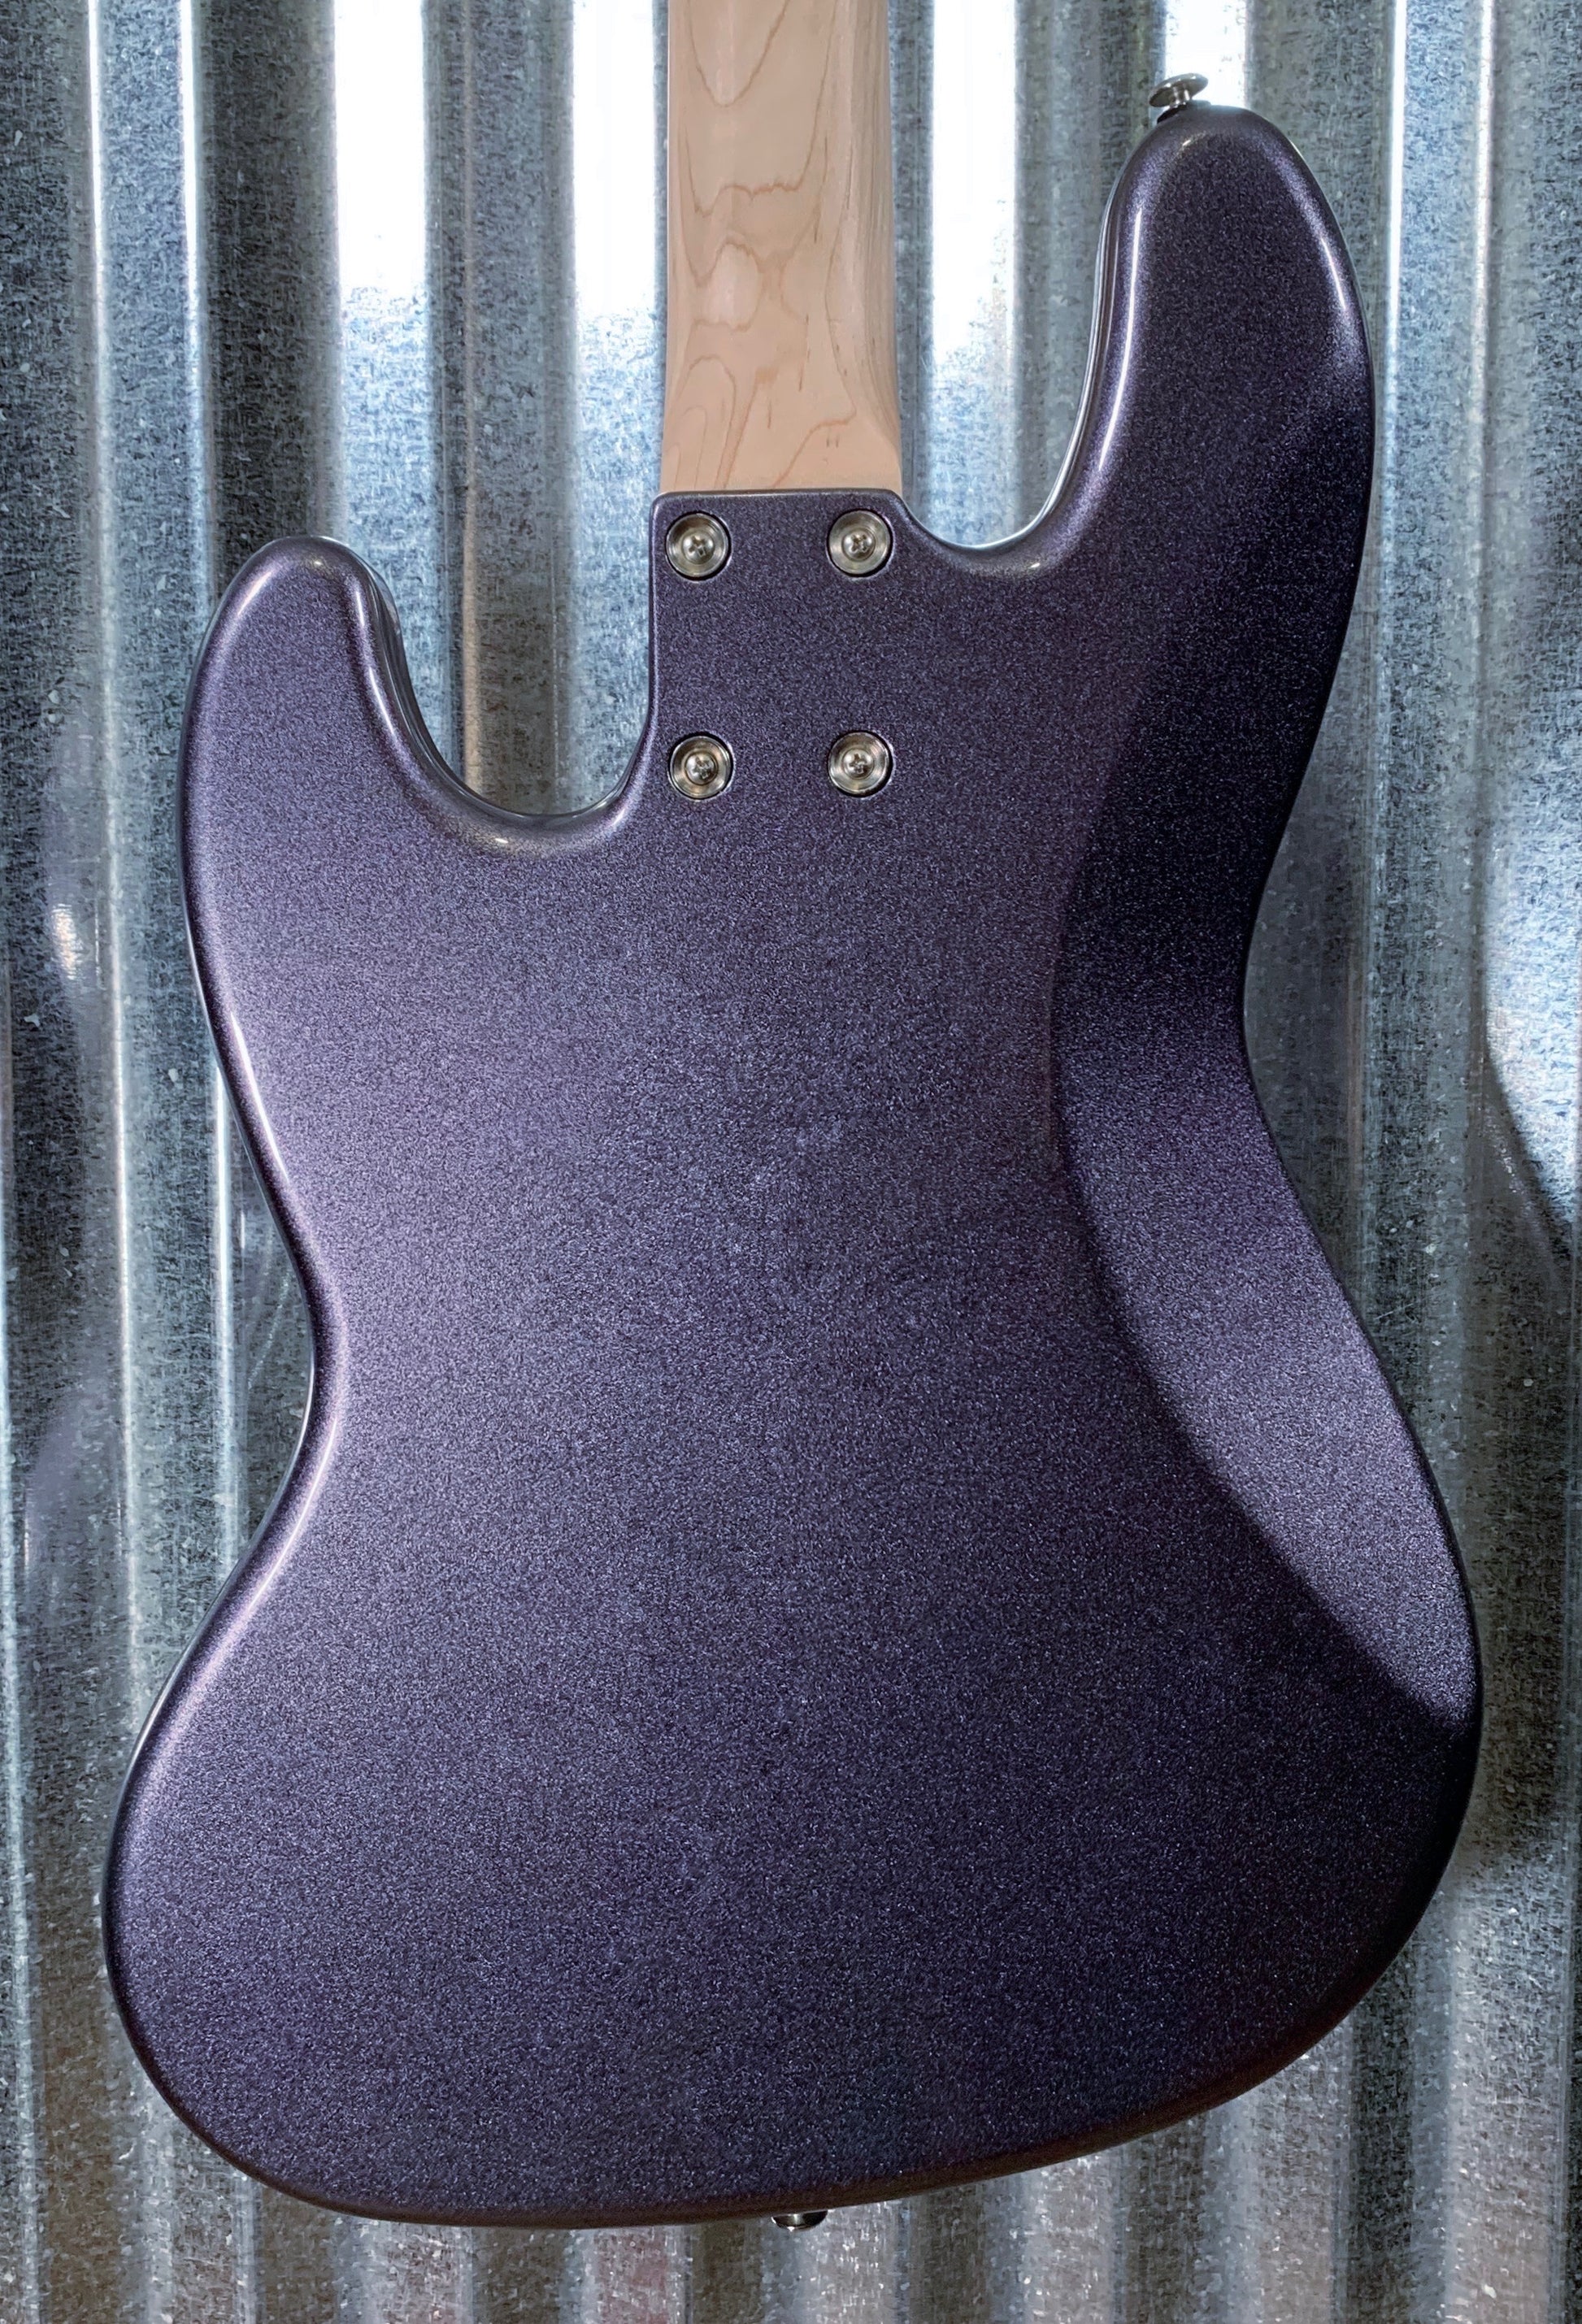 Sparkle Motion Guitars Custom Builds and Projects - Page 2 